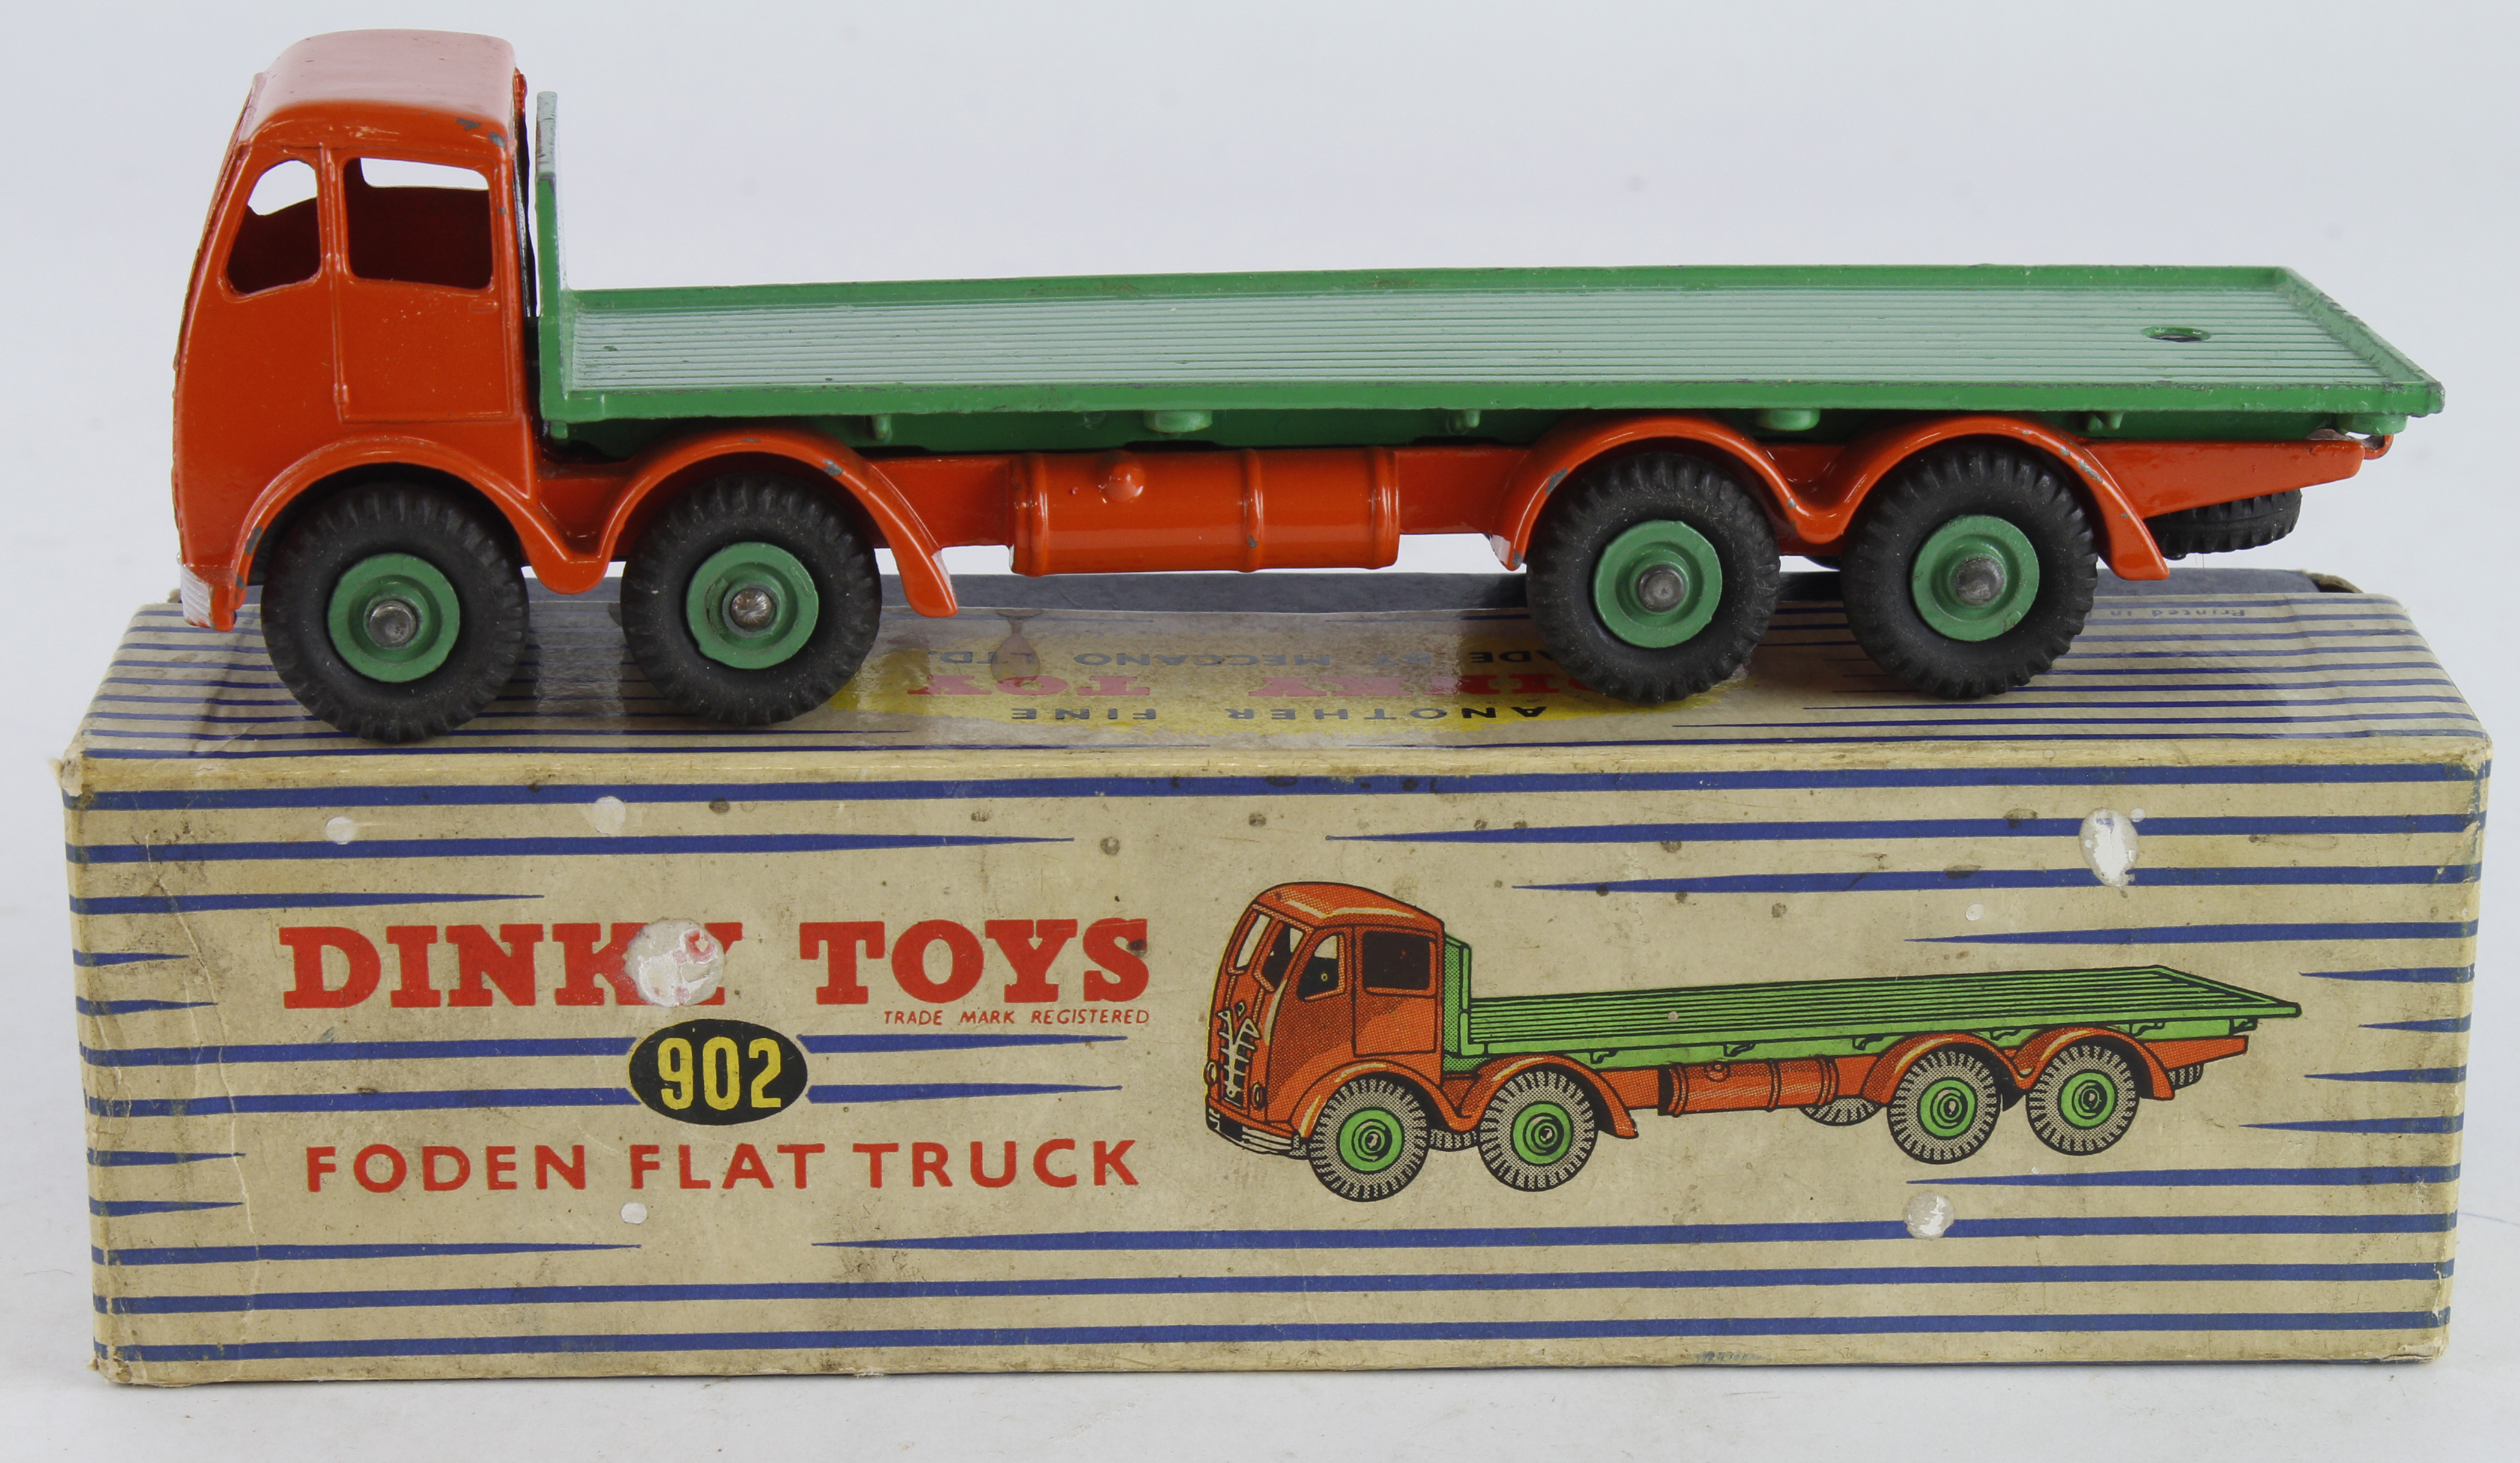 Dinky Toys, no. 902 'Foden Flat Truck' (orange cab and chassis, green back), contained in original